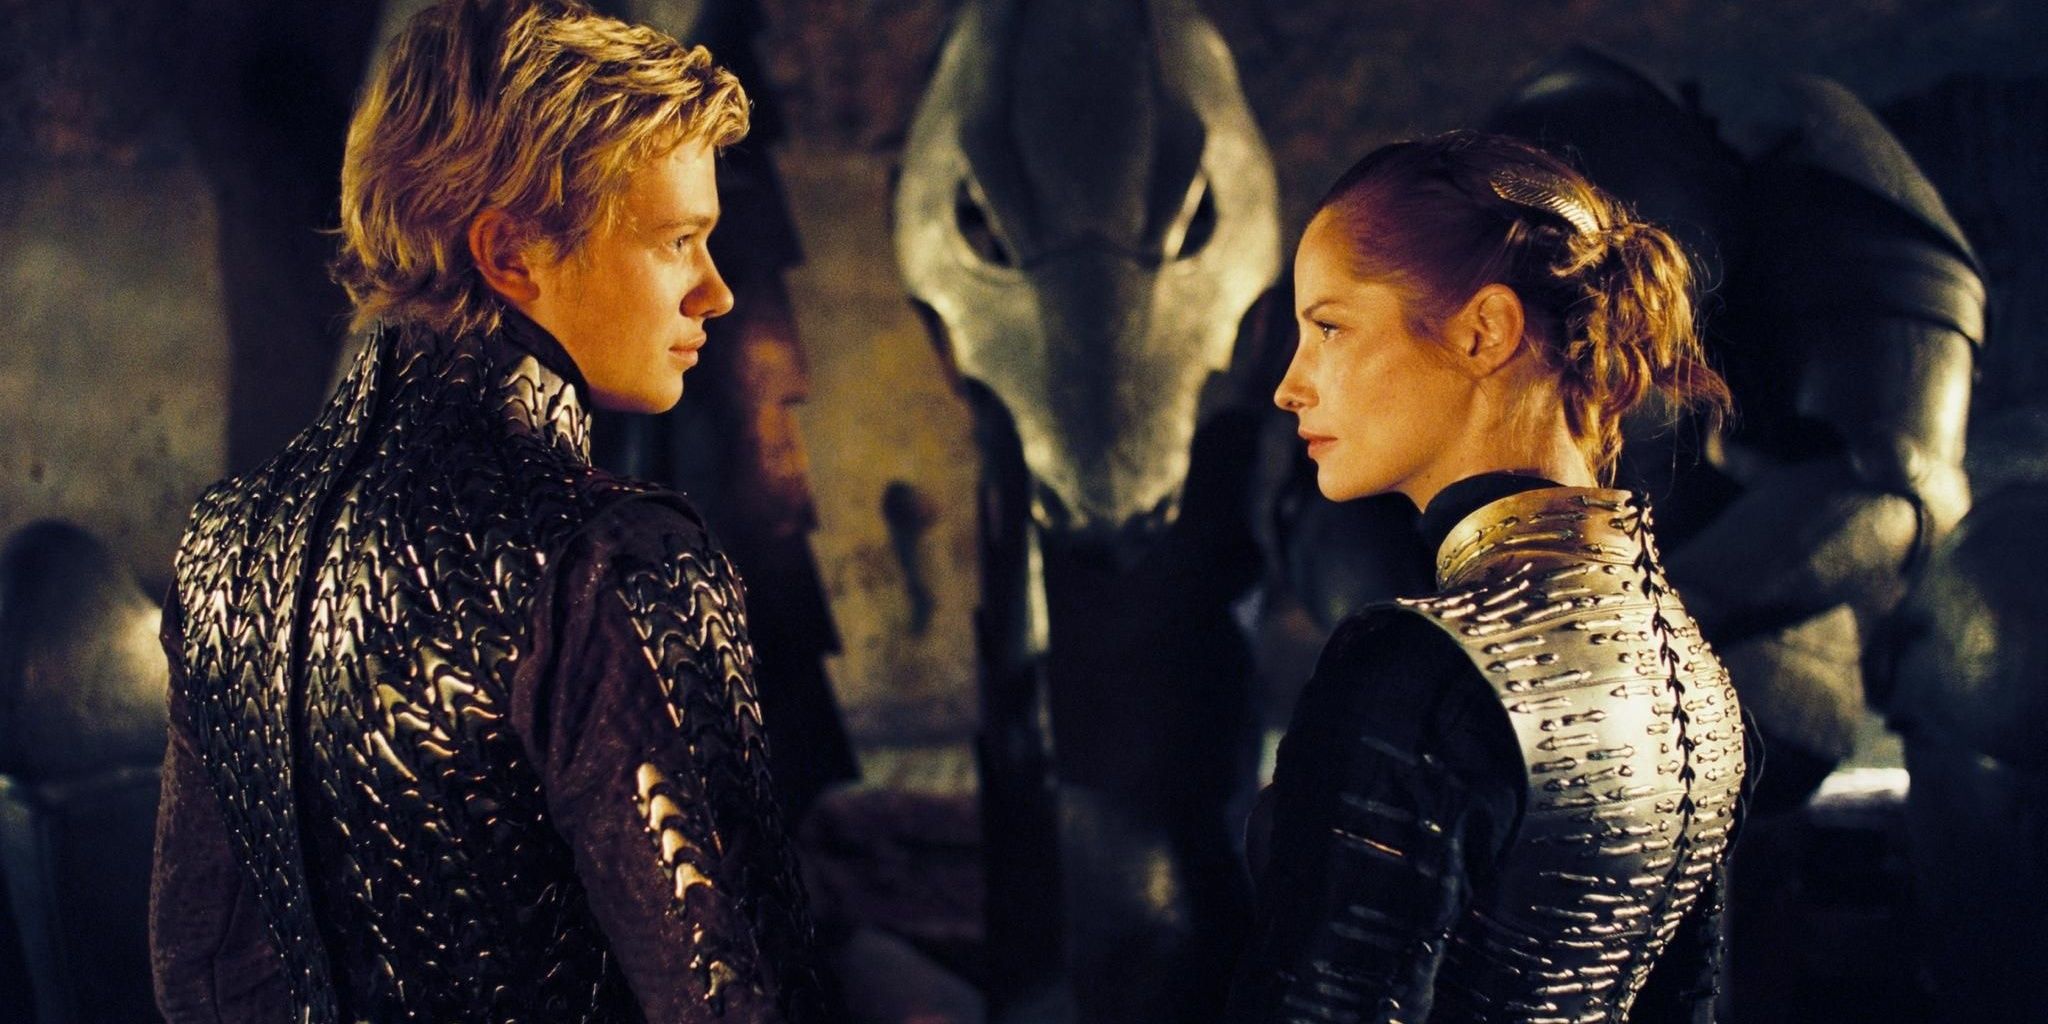 A scene from the movie Eragon with the central characters staring at each other.